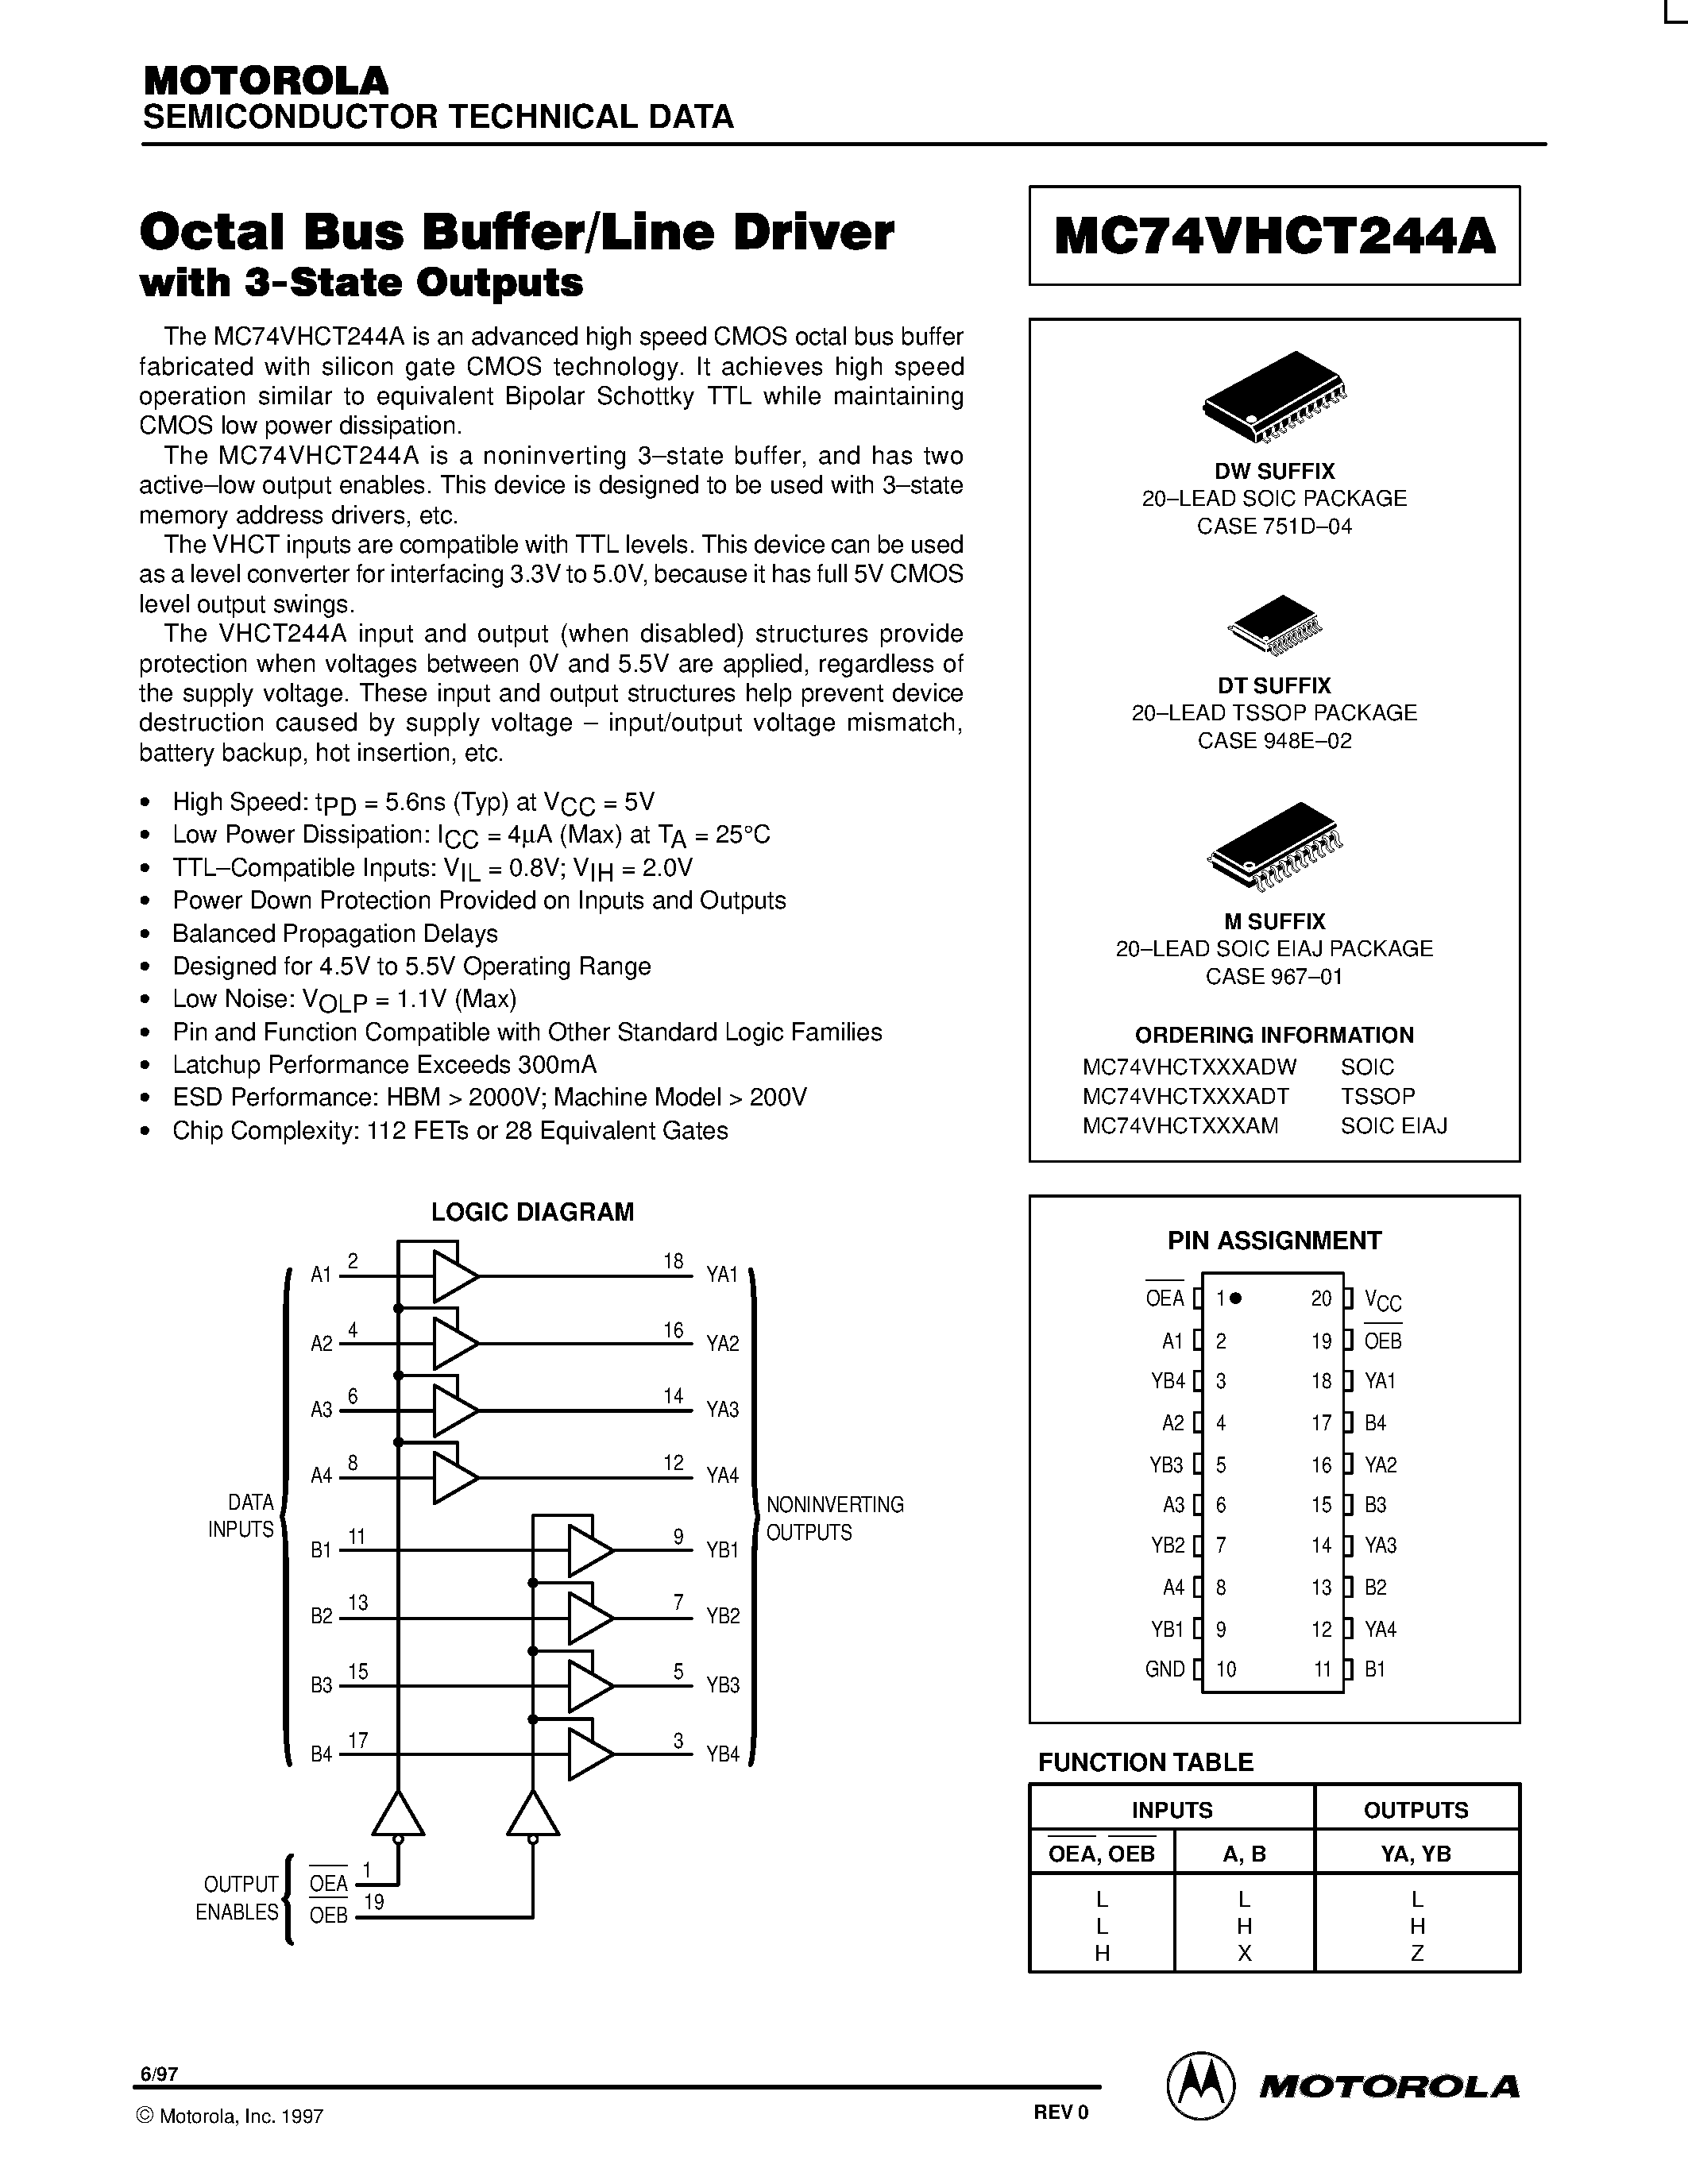 Datasheet MC74VHCT244A - Octal Bus Buffer/Line Driver with 3-State Outputs page 1